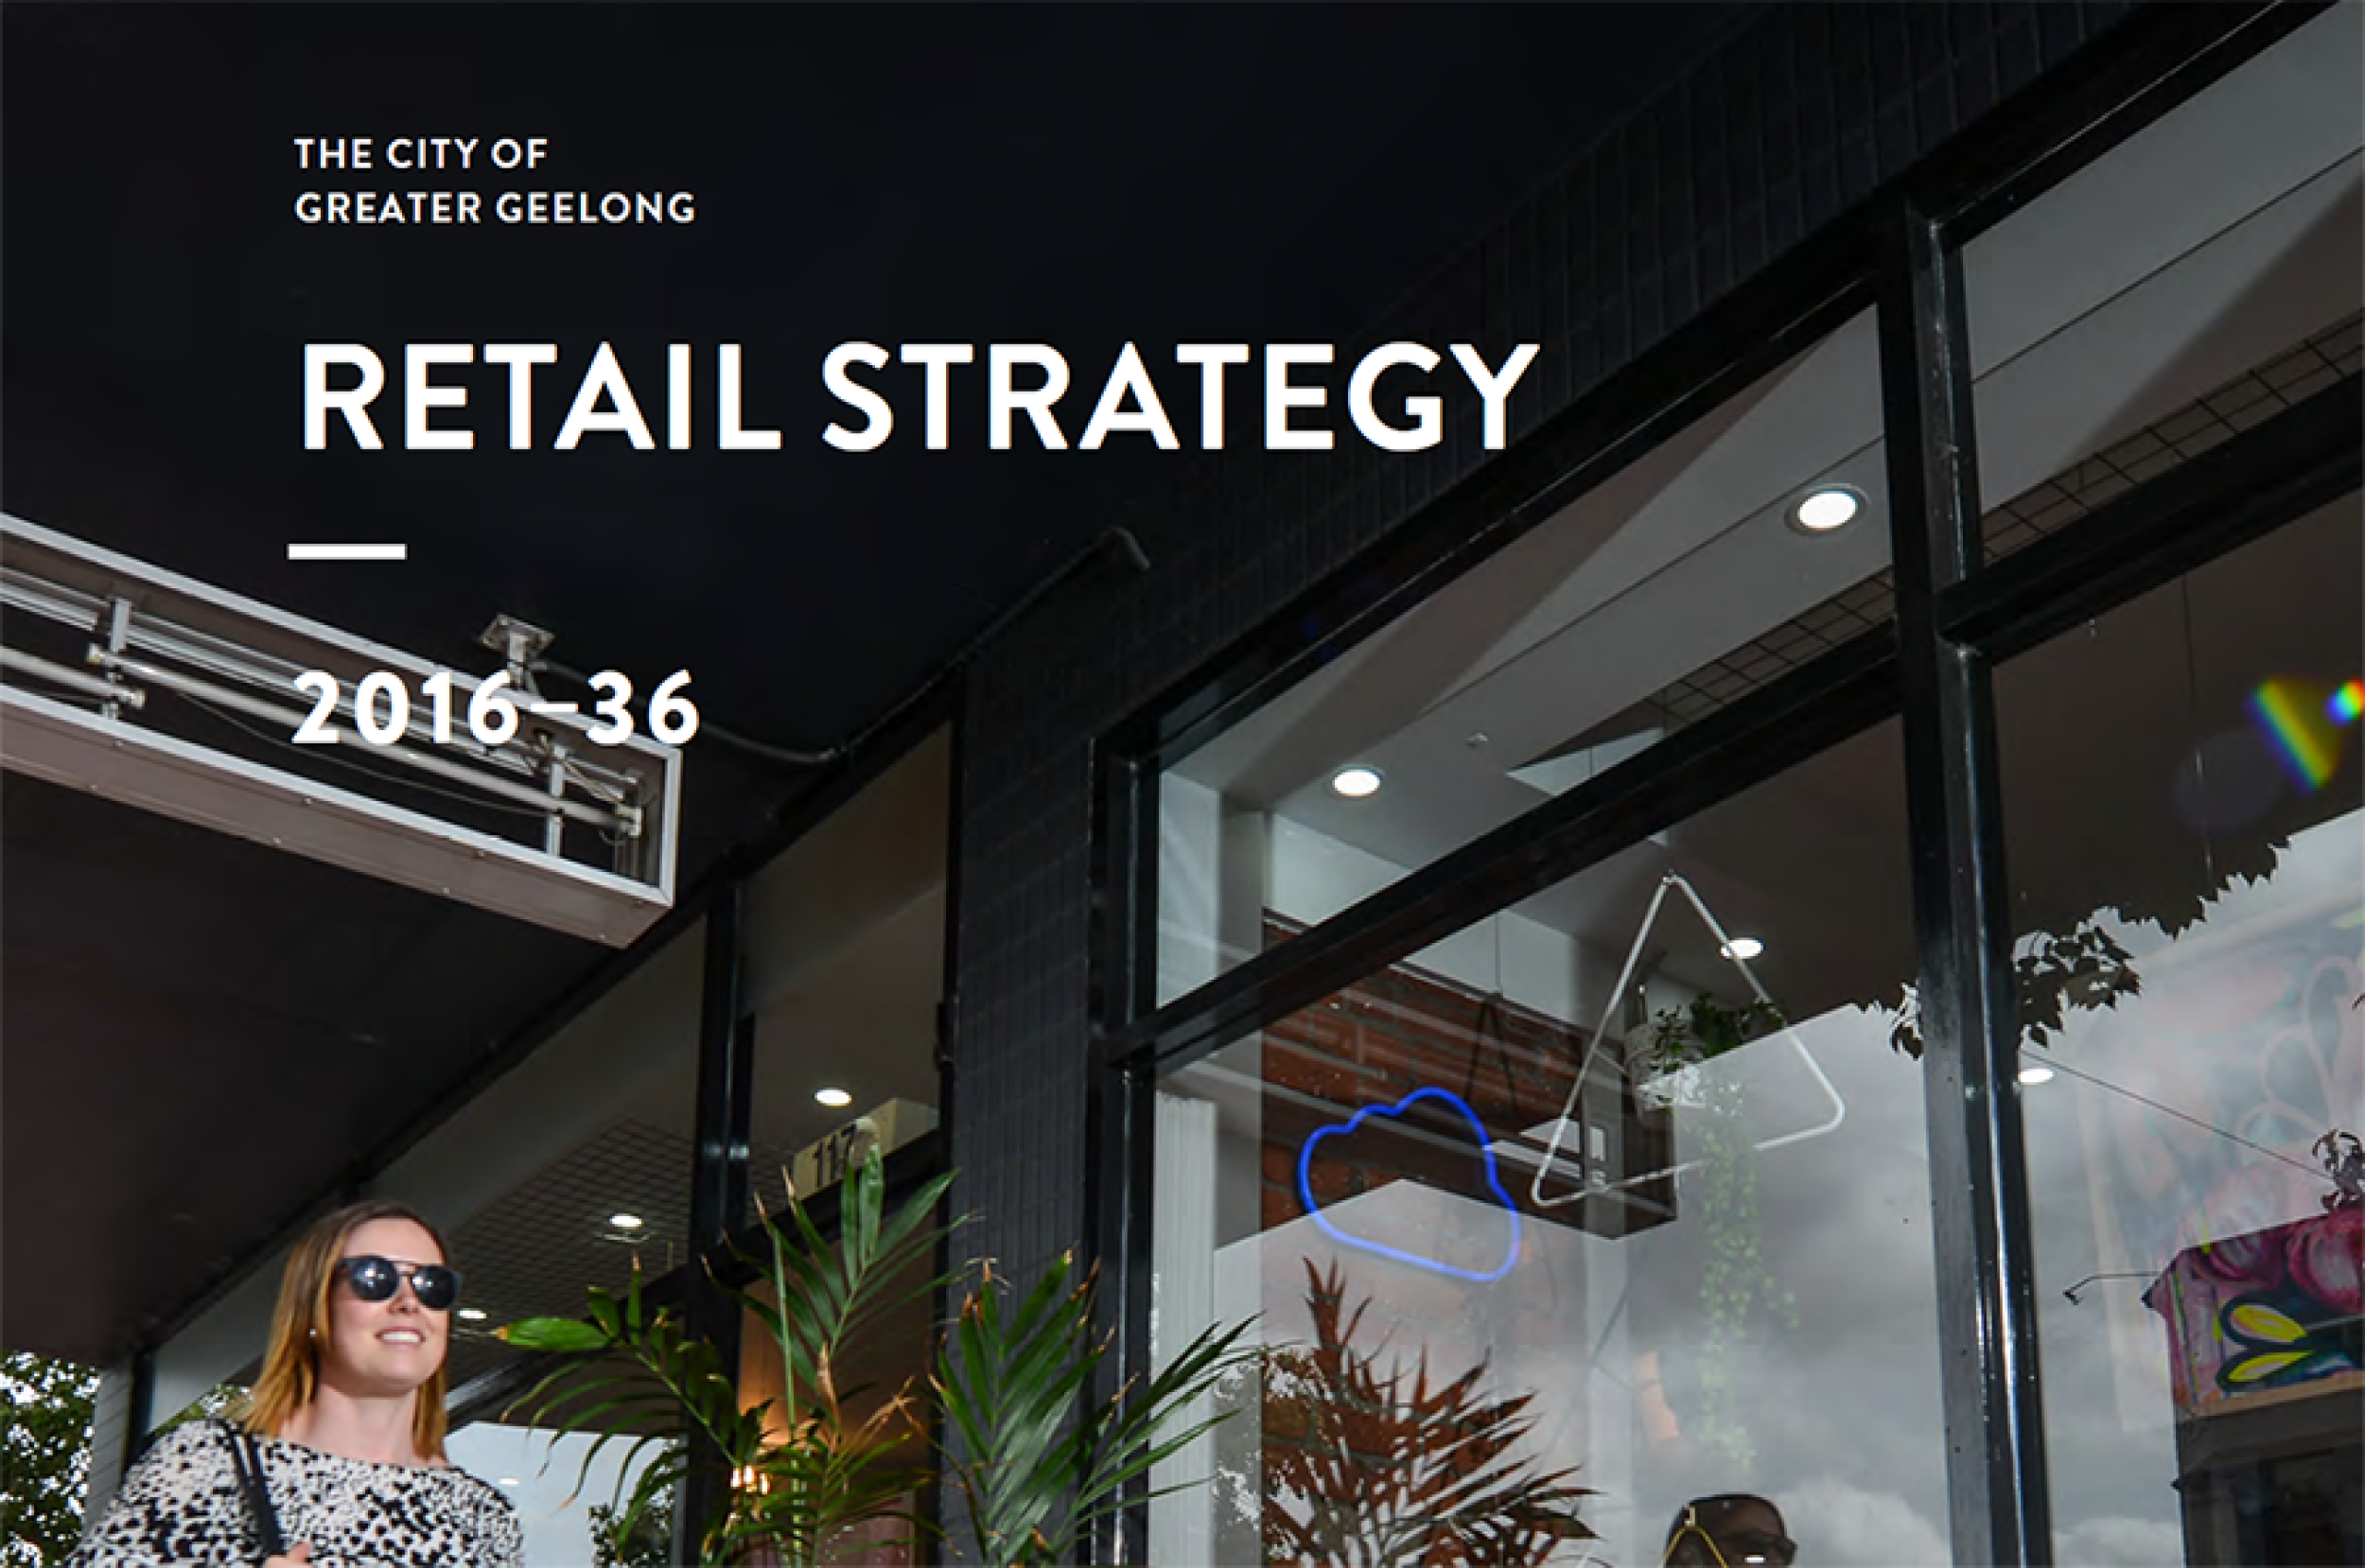 SGS Economics and Planning Greater Geelong Retail Image